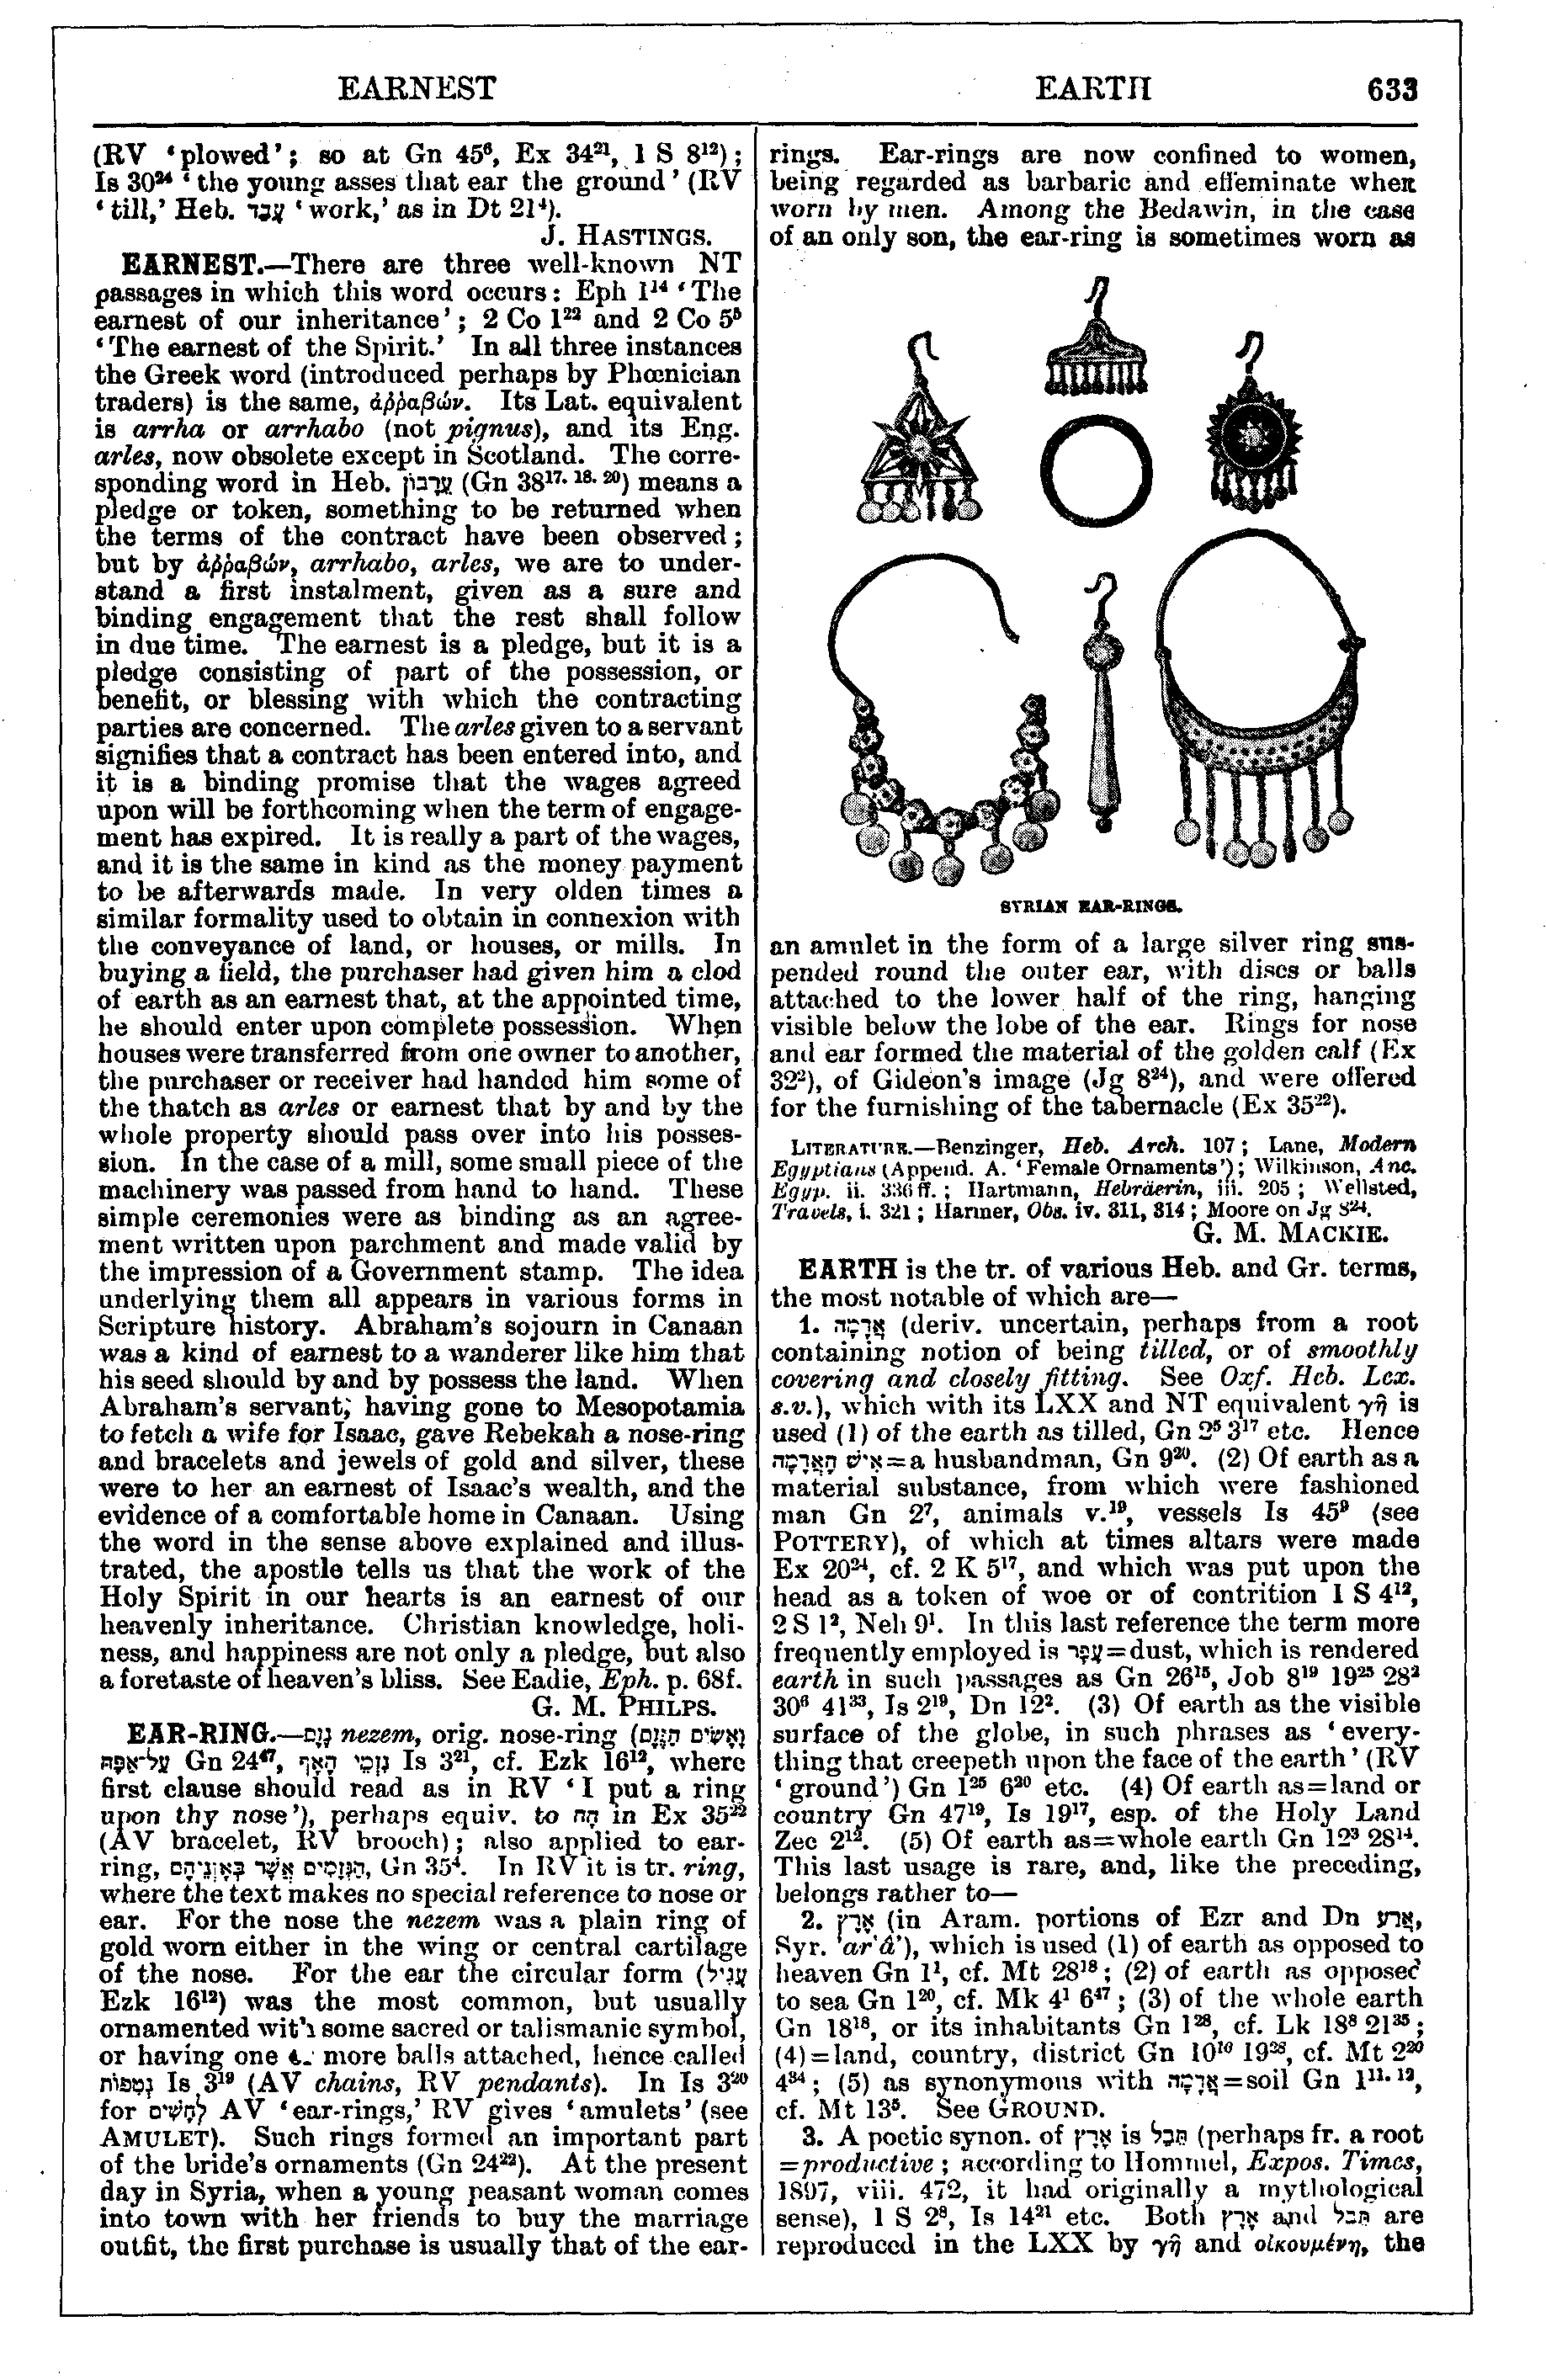 Image of page 633